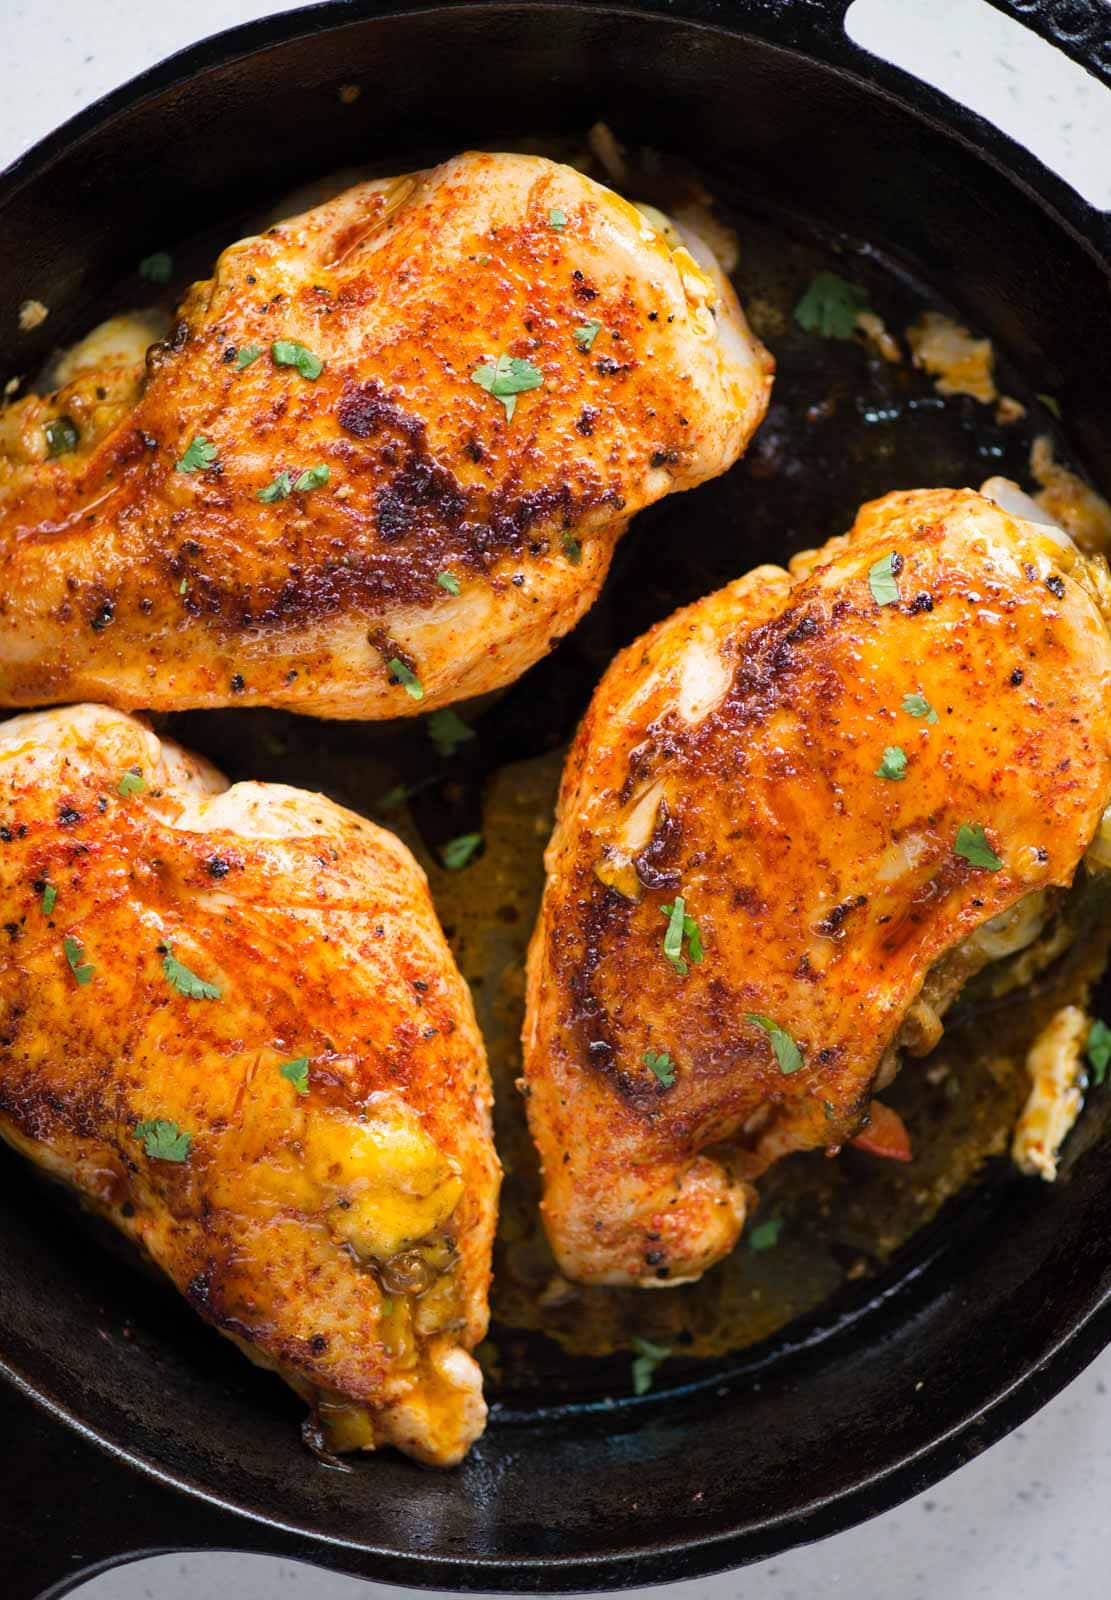 Three chicken breasts with fajita-stuffing, which is made of caramelized and crunchy peppers, onion, Mexican seasoning, and cheese, then baked to perfection on a  skillet. 